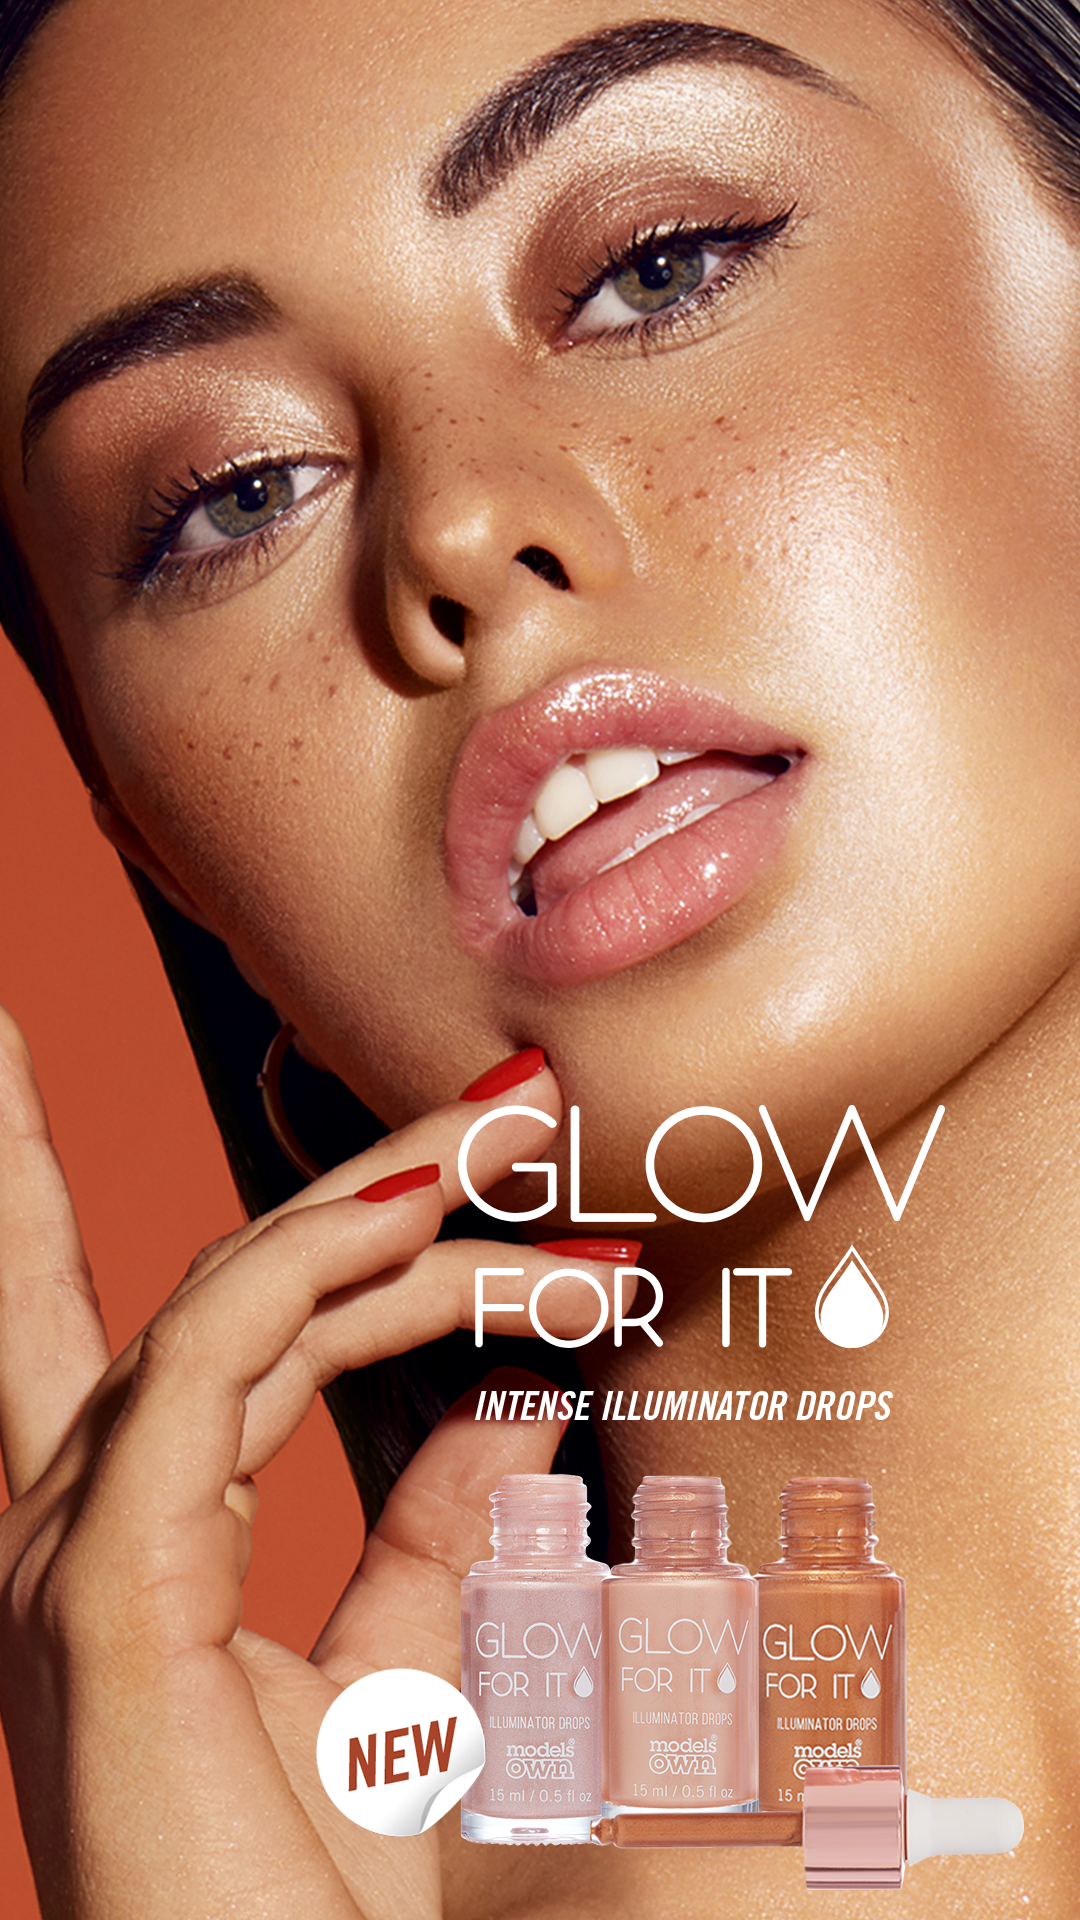 Glow For It Drops Lead Creative.png